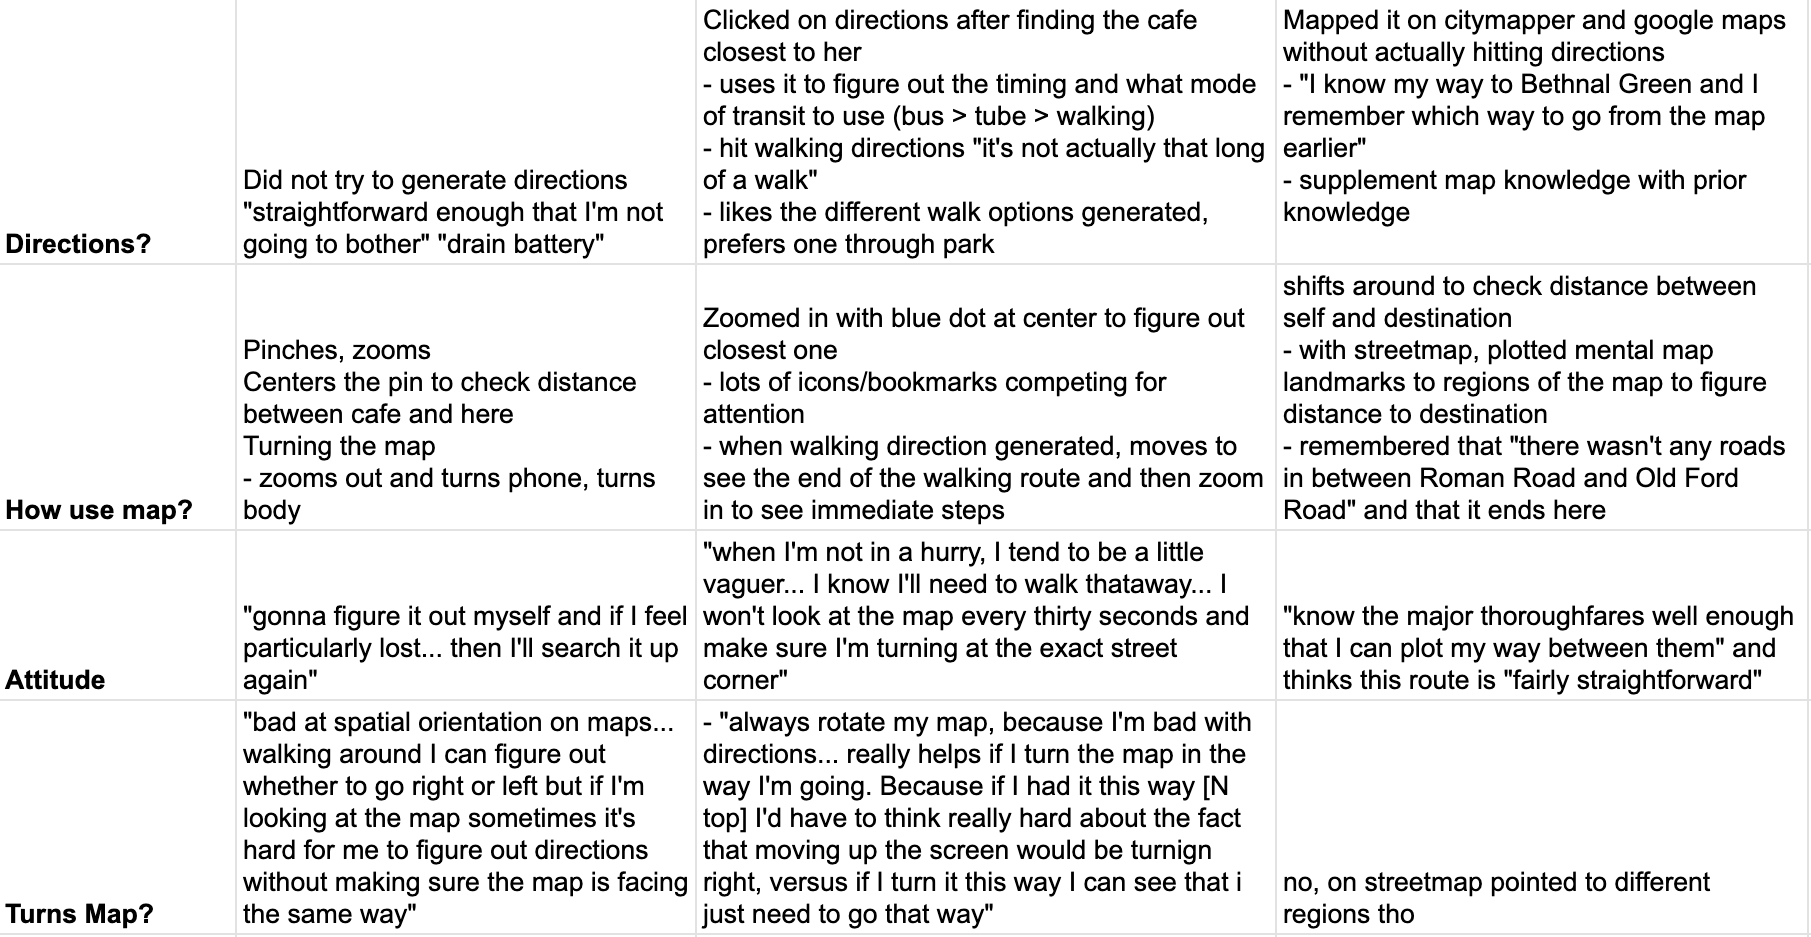 Table comparing directions, usage of map, attitude towards navigation, and turning the map behavior across participants